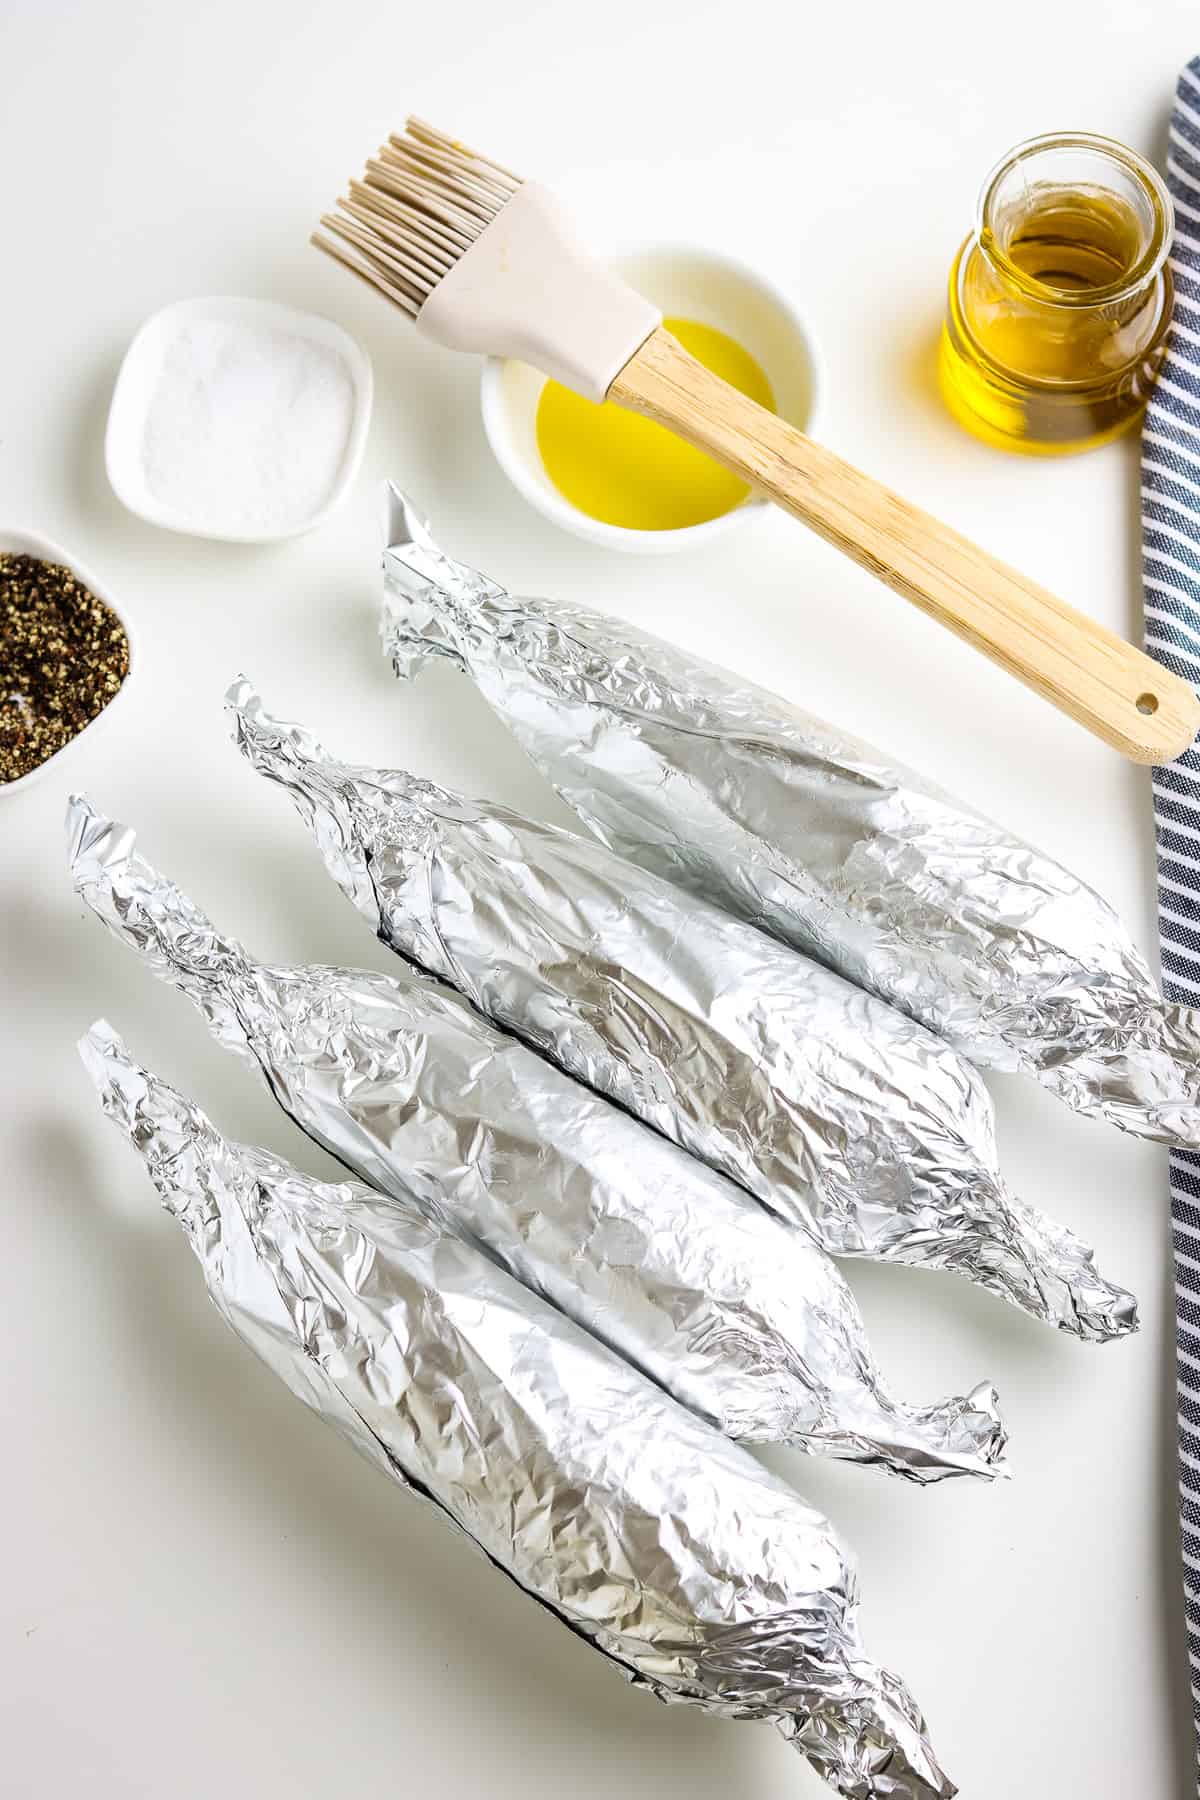 Corn on the cob wrapped in foil